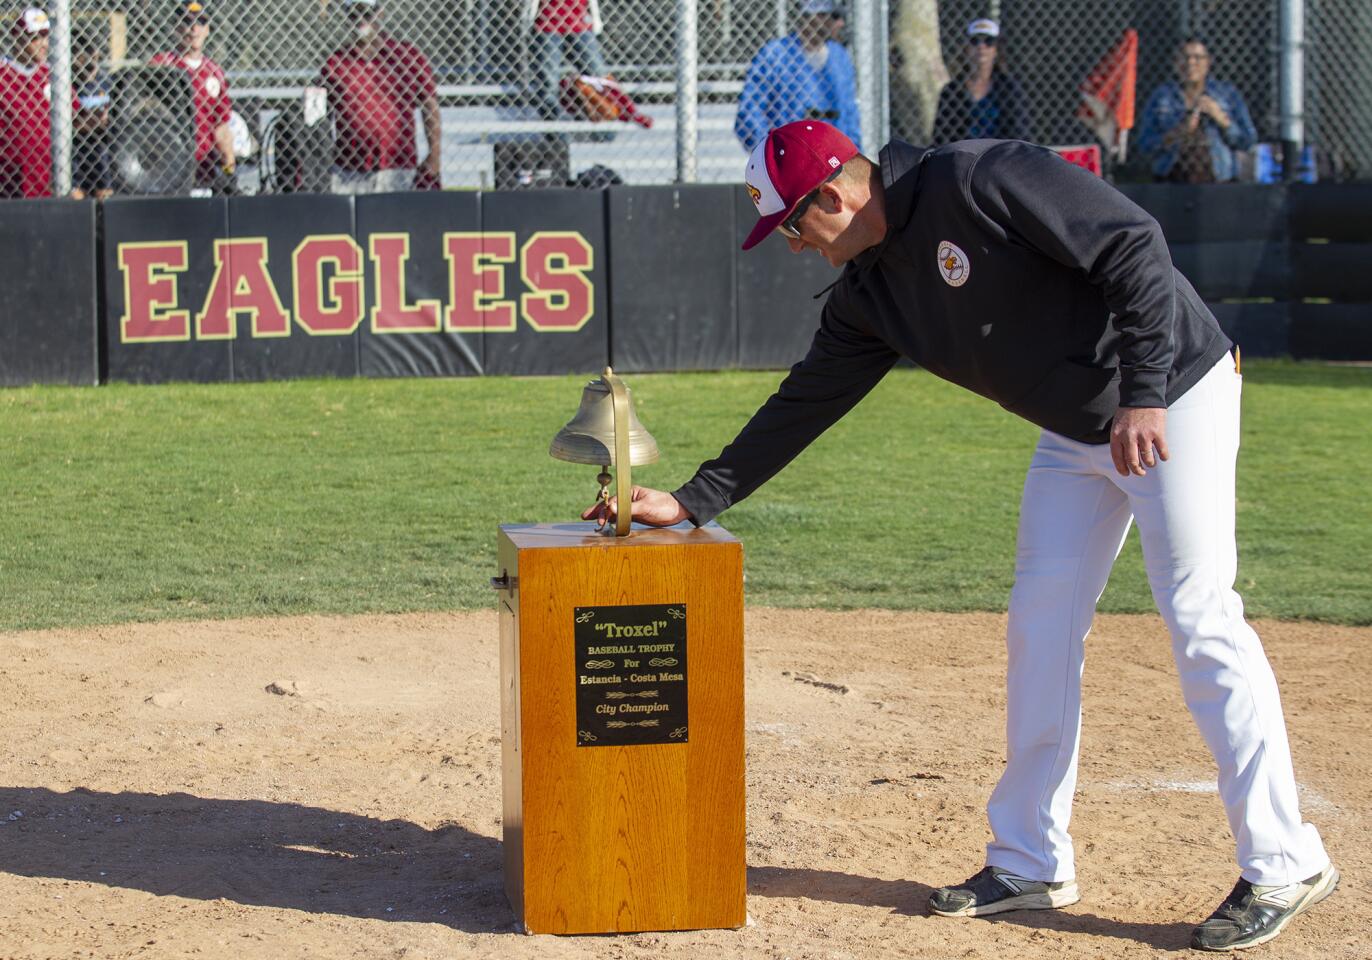 Estancia coach Kevin Conlin rings the Paul Troxel trophy after beating Costa Mesa 3-2 in an Orange Coast League game on Wednesday.